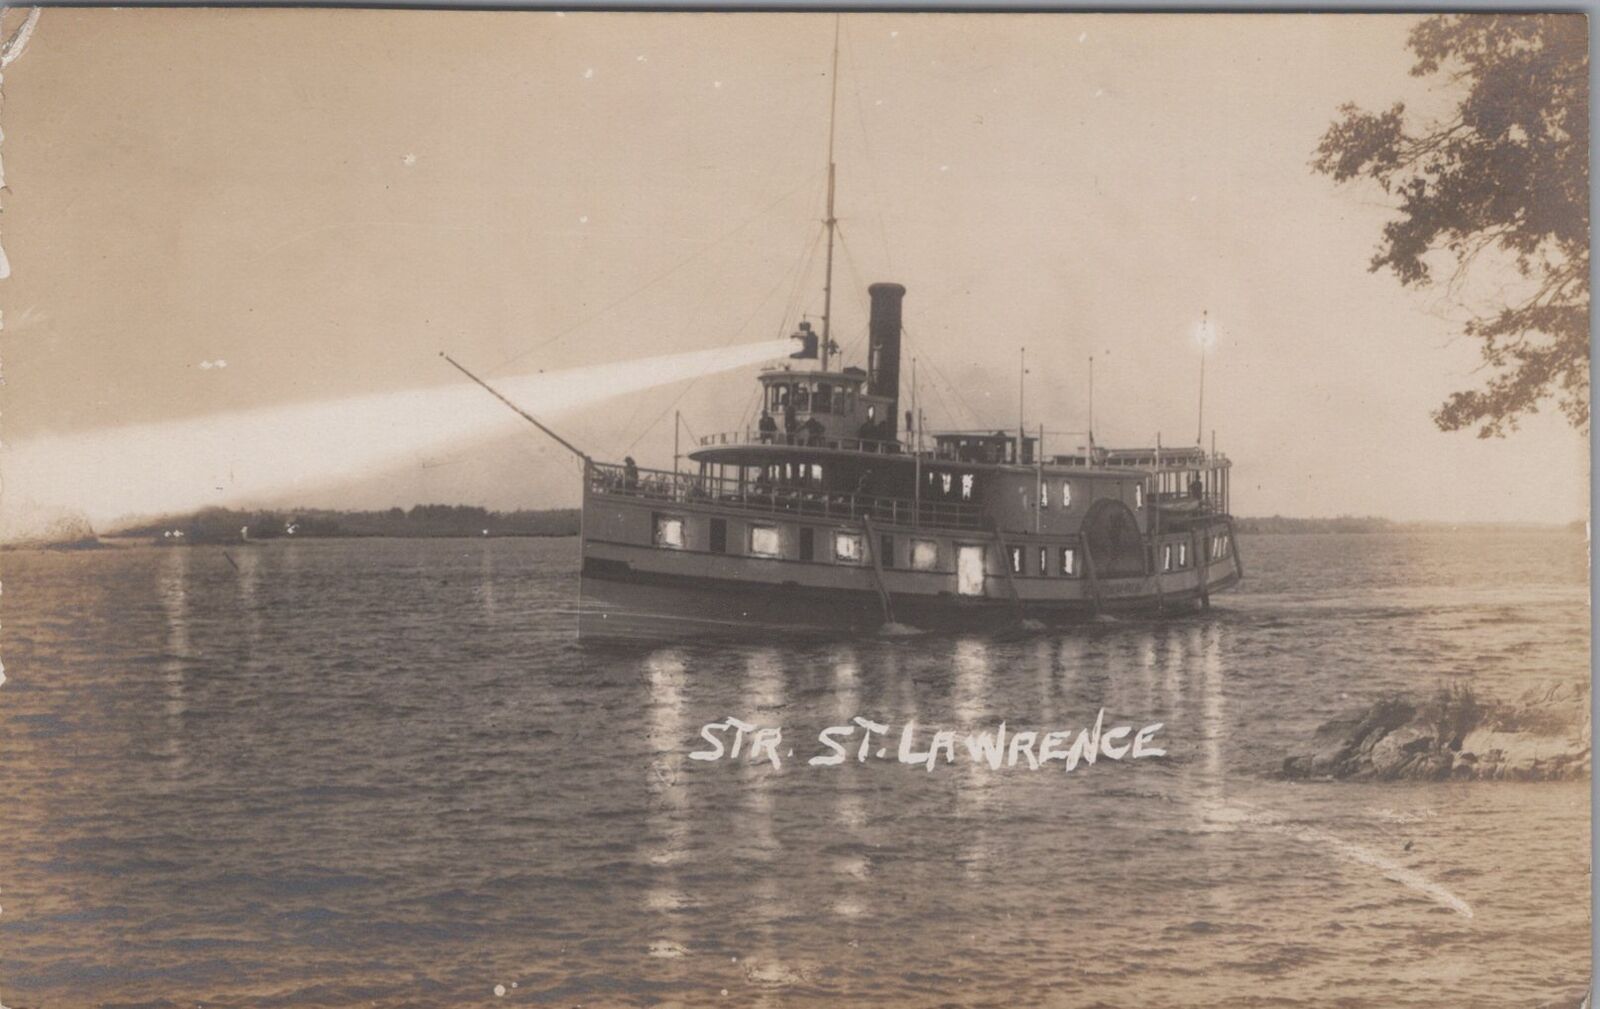 The St.Lawrence Steamer, Night View, RPPC Photo Postcard, c1910s